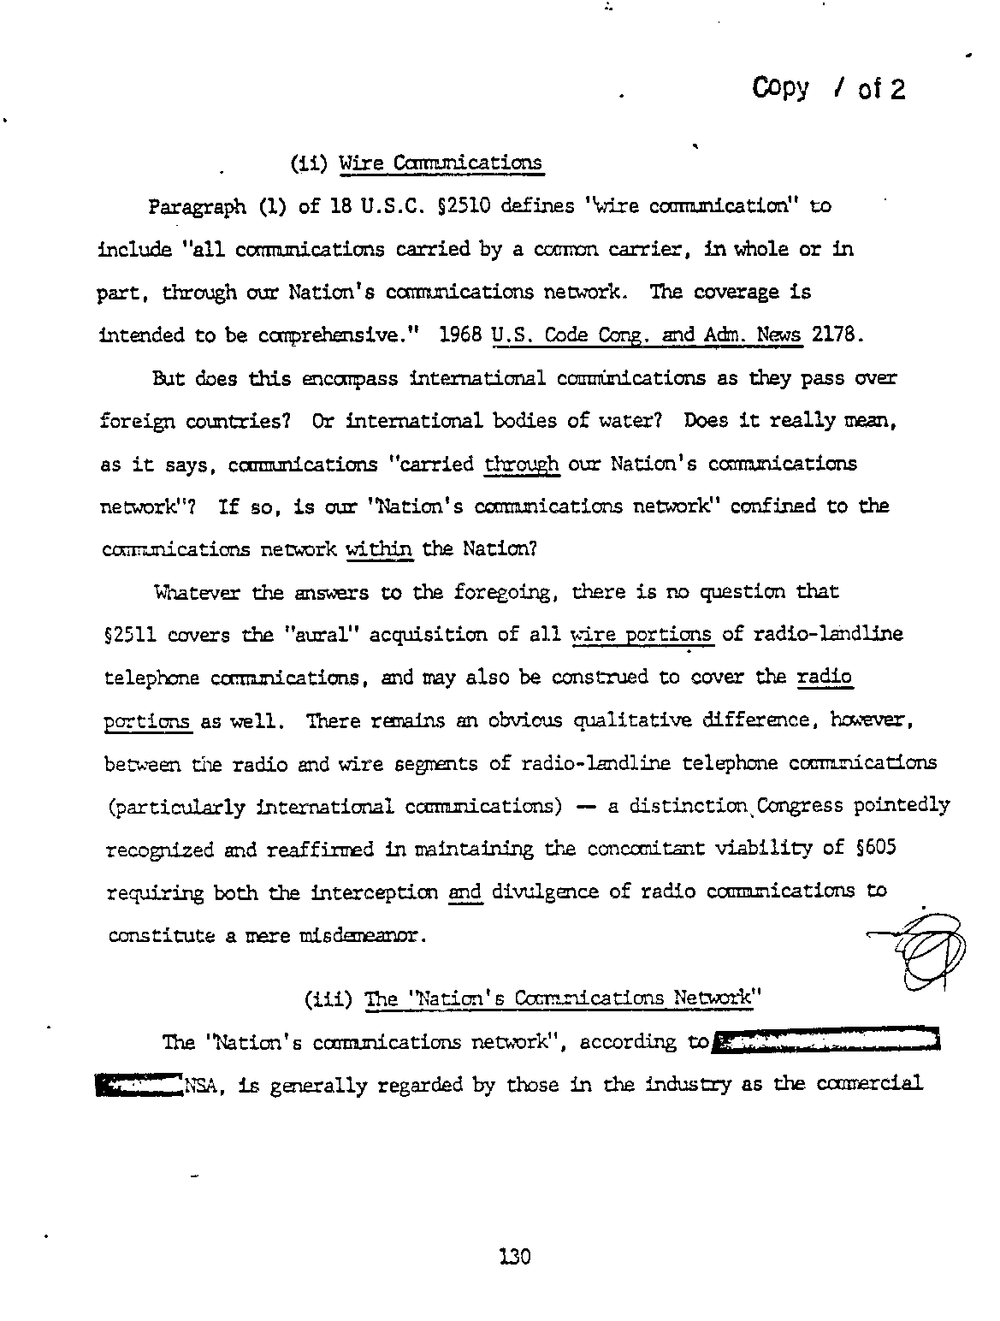 Page 138 from Report on Inquiry Into CIA Related Electronic Surveillance Activities